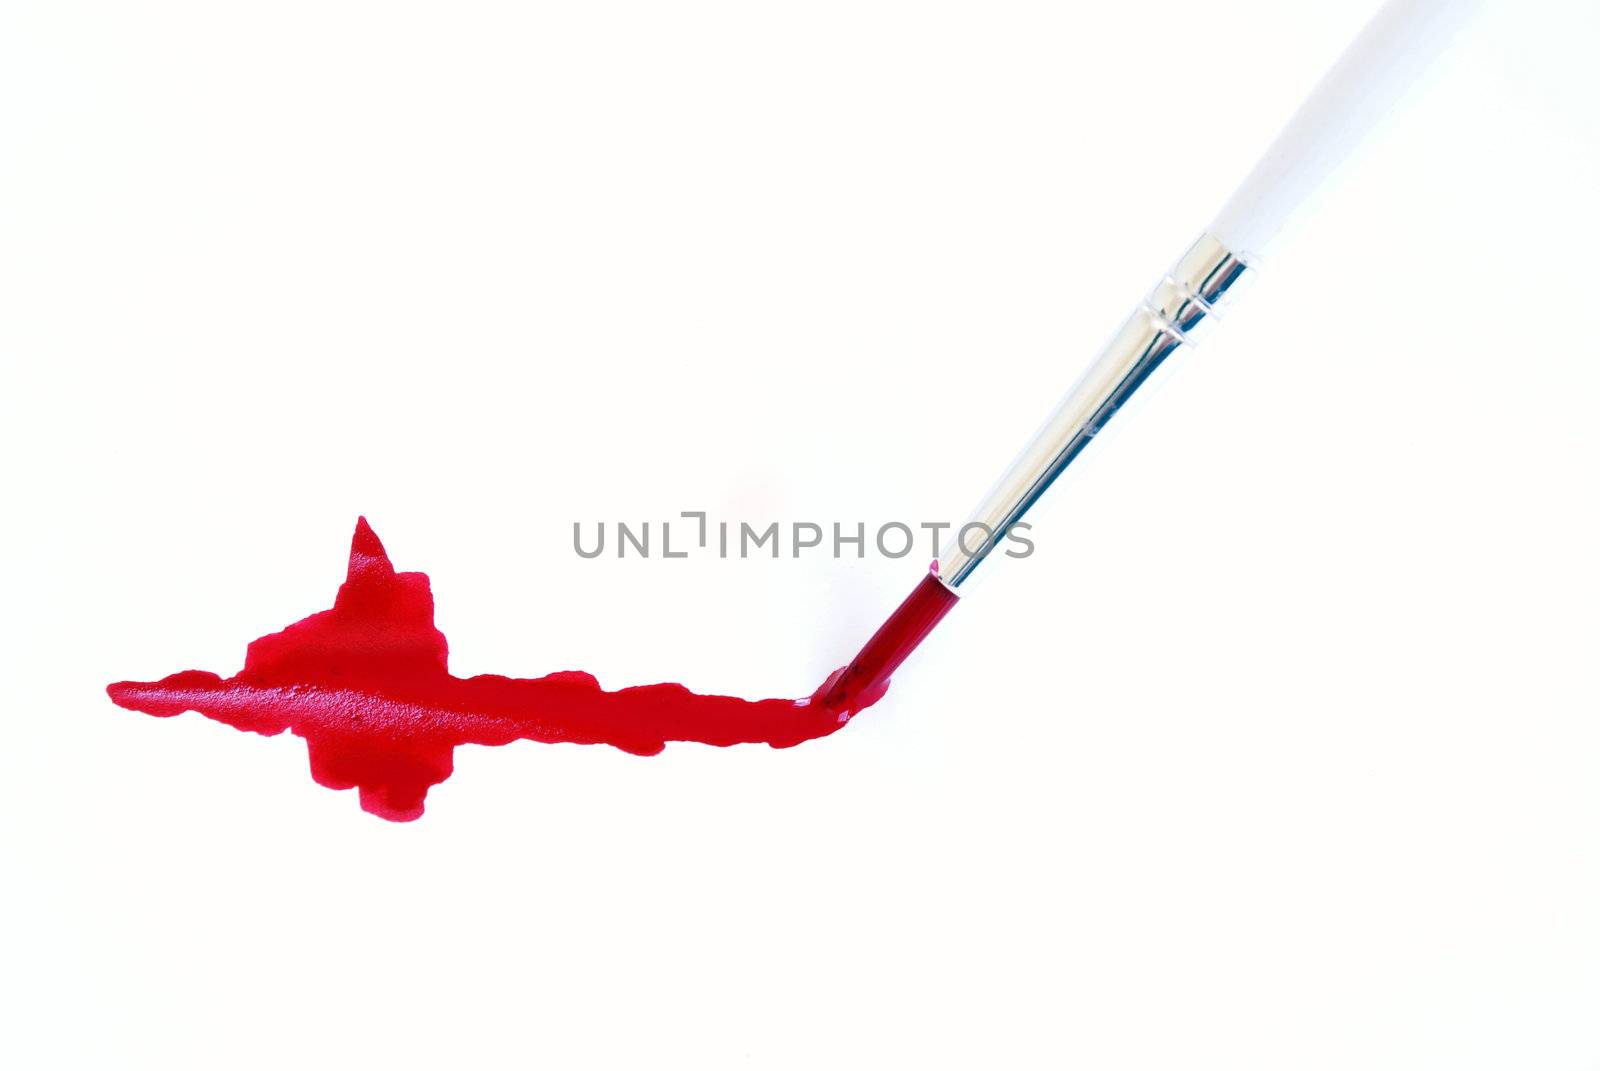 A paint brush making a red stroke of paint.